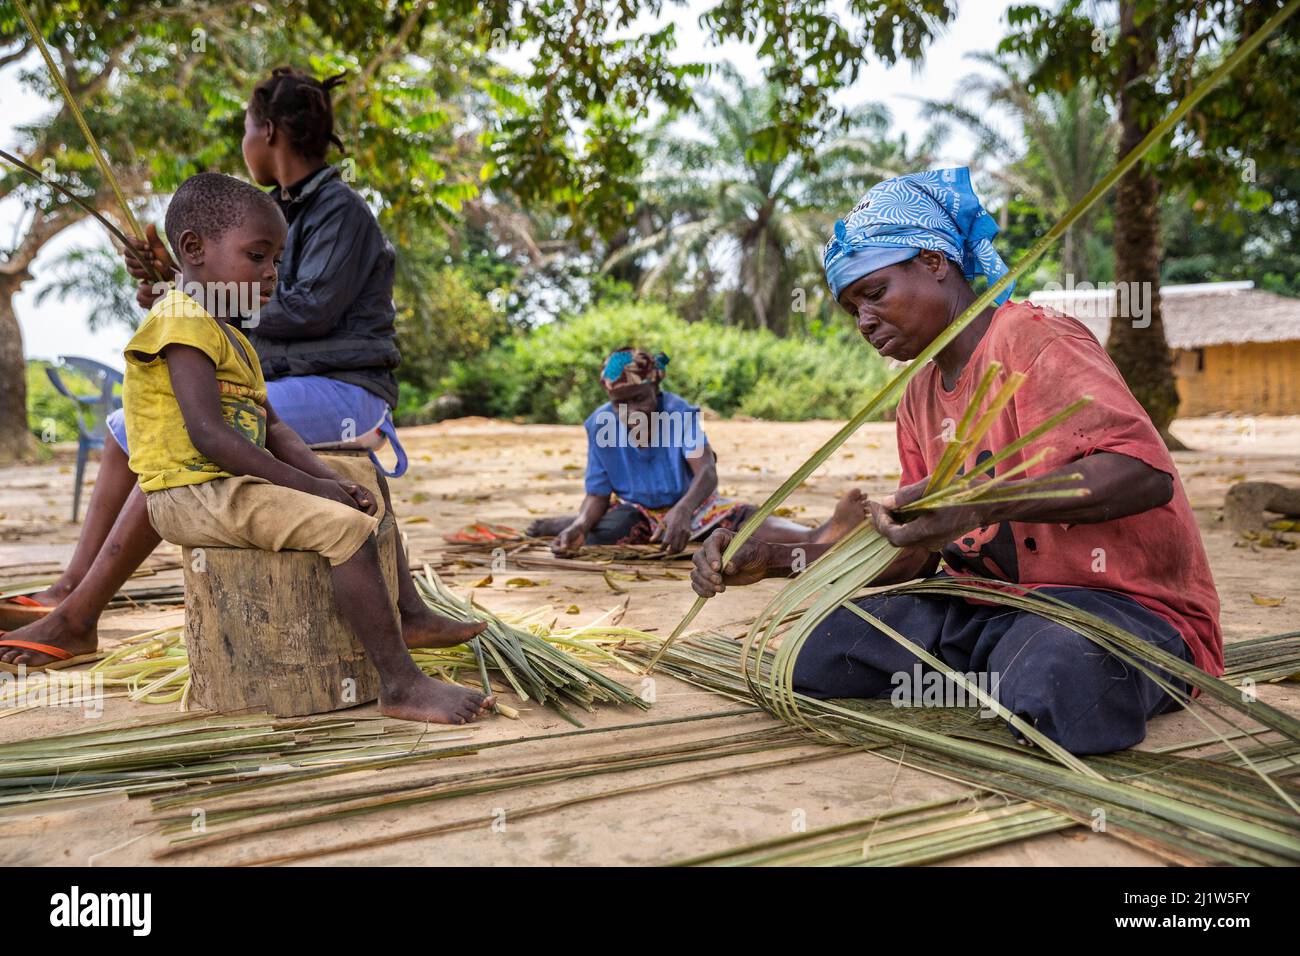 Local women weaving plants nto mats to later use or sell at markets. Democratic Republic of the Congo. Stock Photo